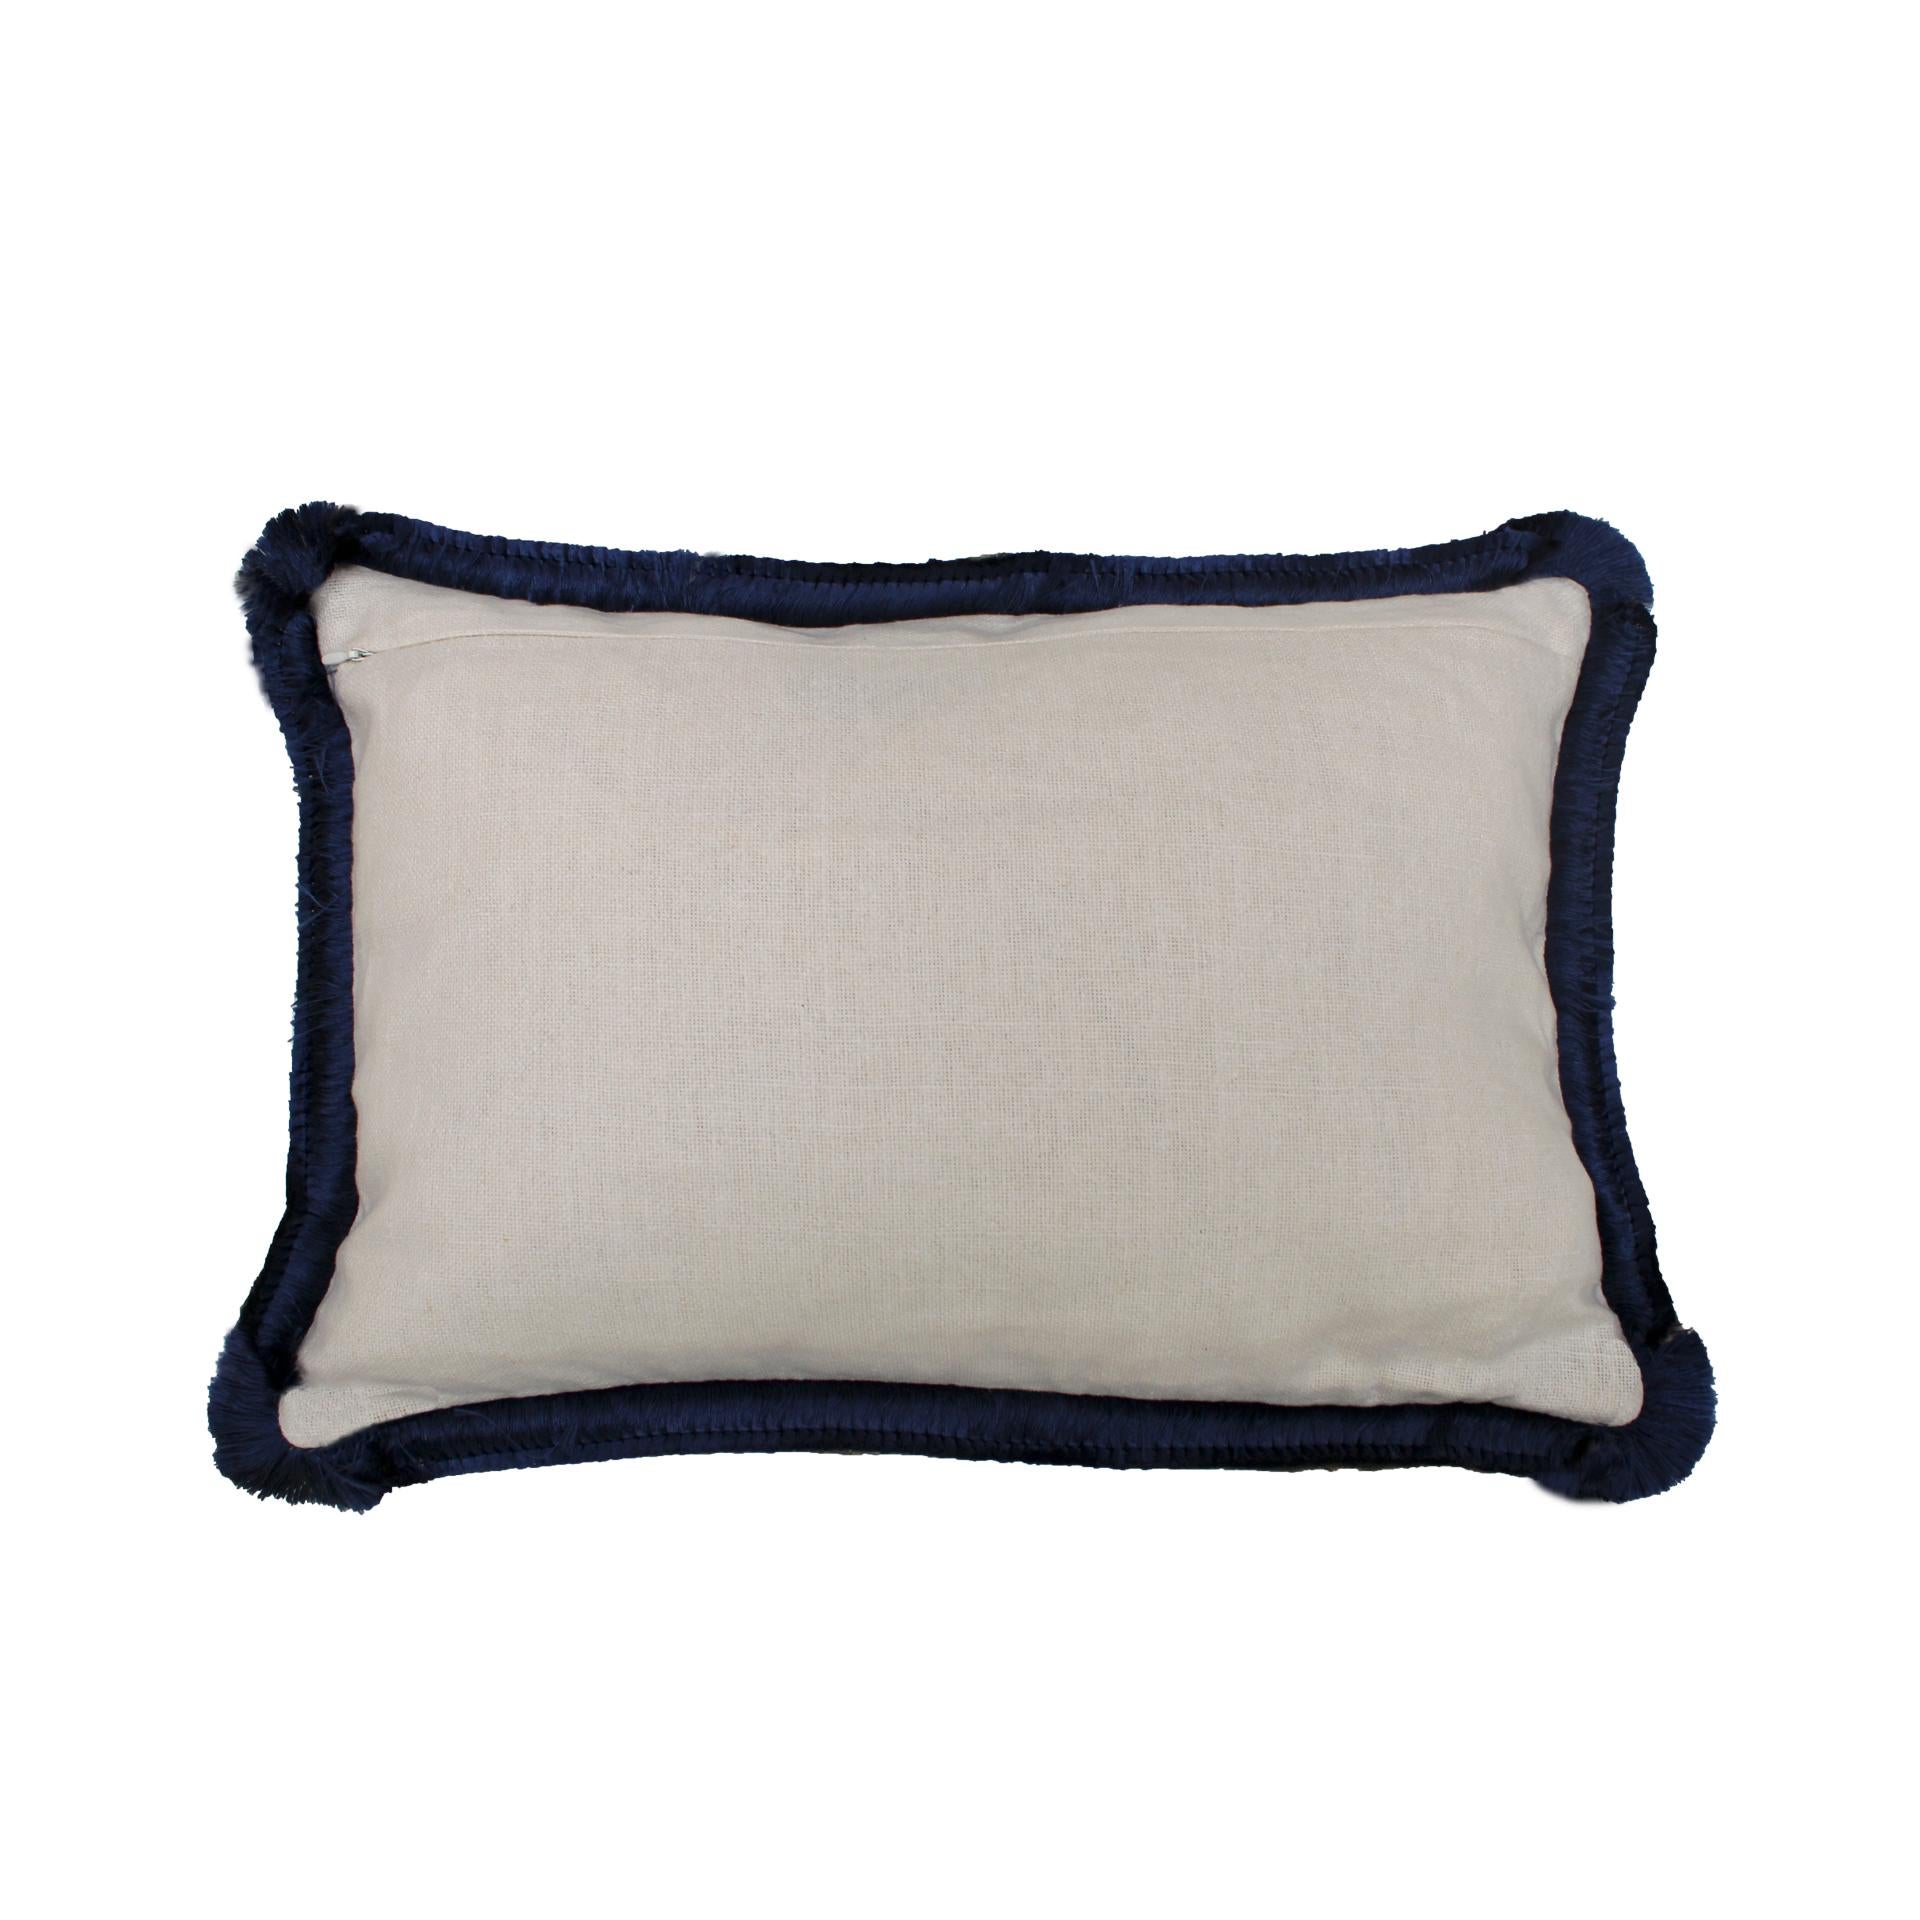 Velvet cushion in high quality cotton with blue leopard print, double black tinsel trim and linen back with invisible zipper on the back.

Every item LA Studio offers is checked by our team of 10 craftsmen in our in-house workshop. Special